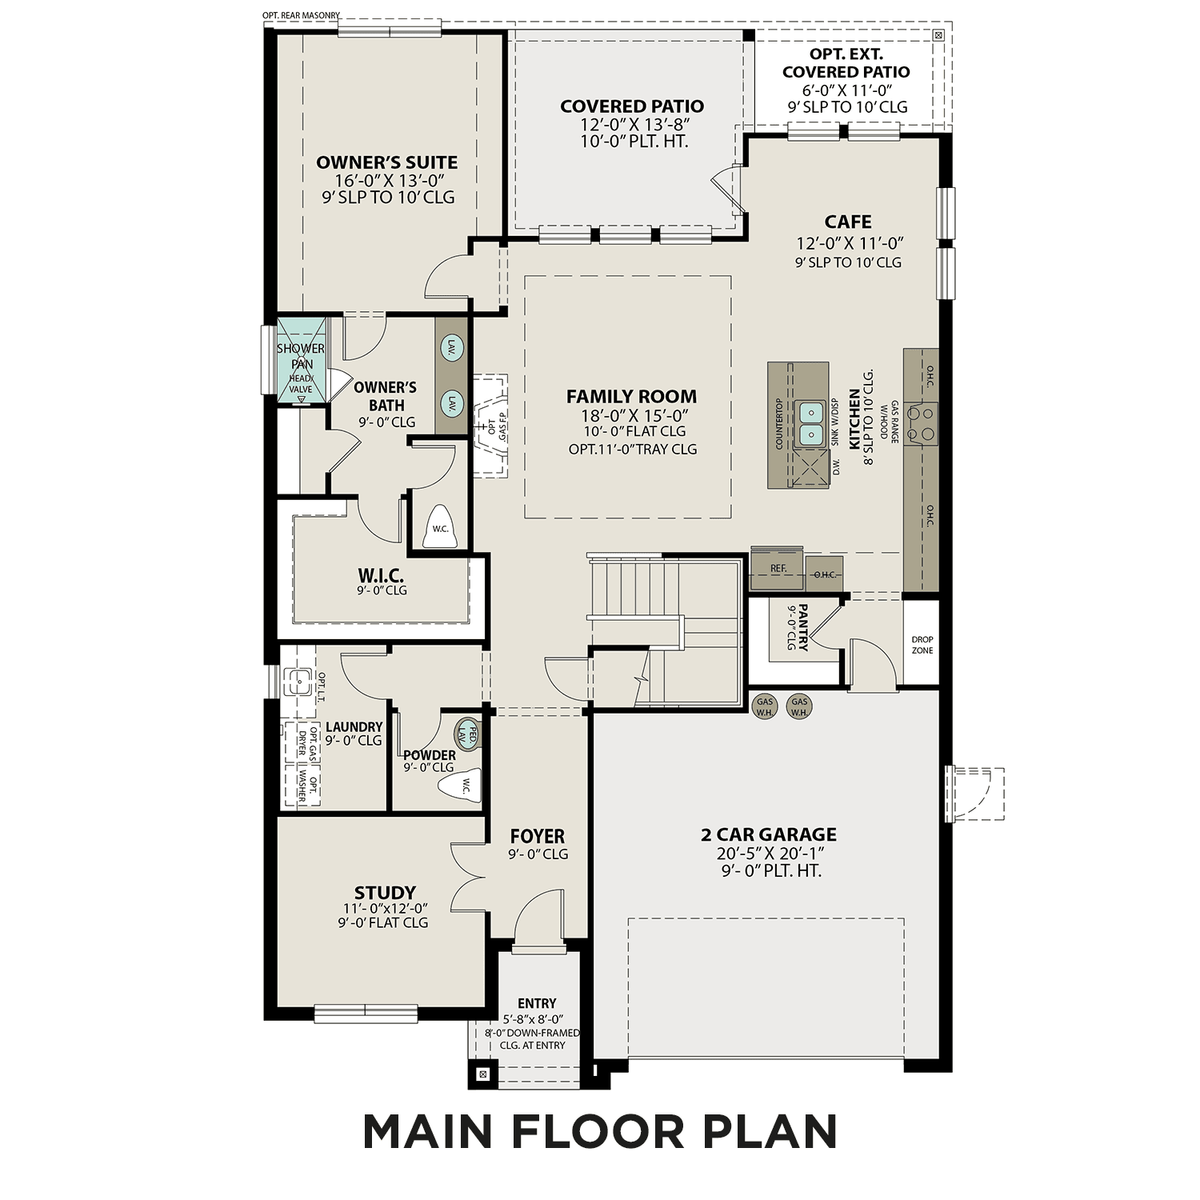 1 - The Sequoia A buildable floor plan layout in Davidson Homes' Lago Mar community.